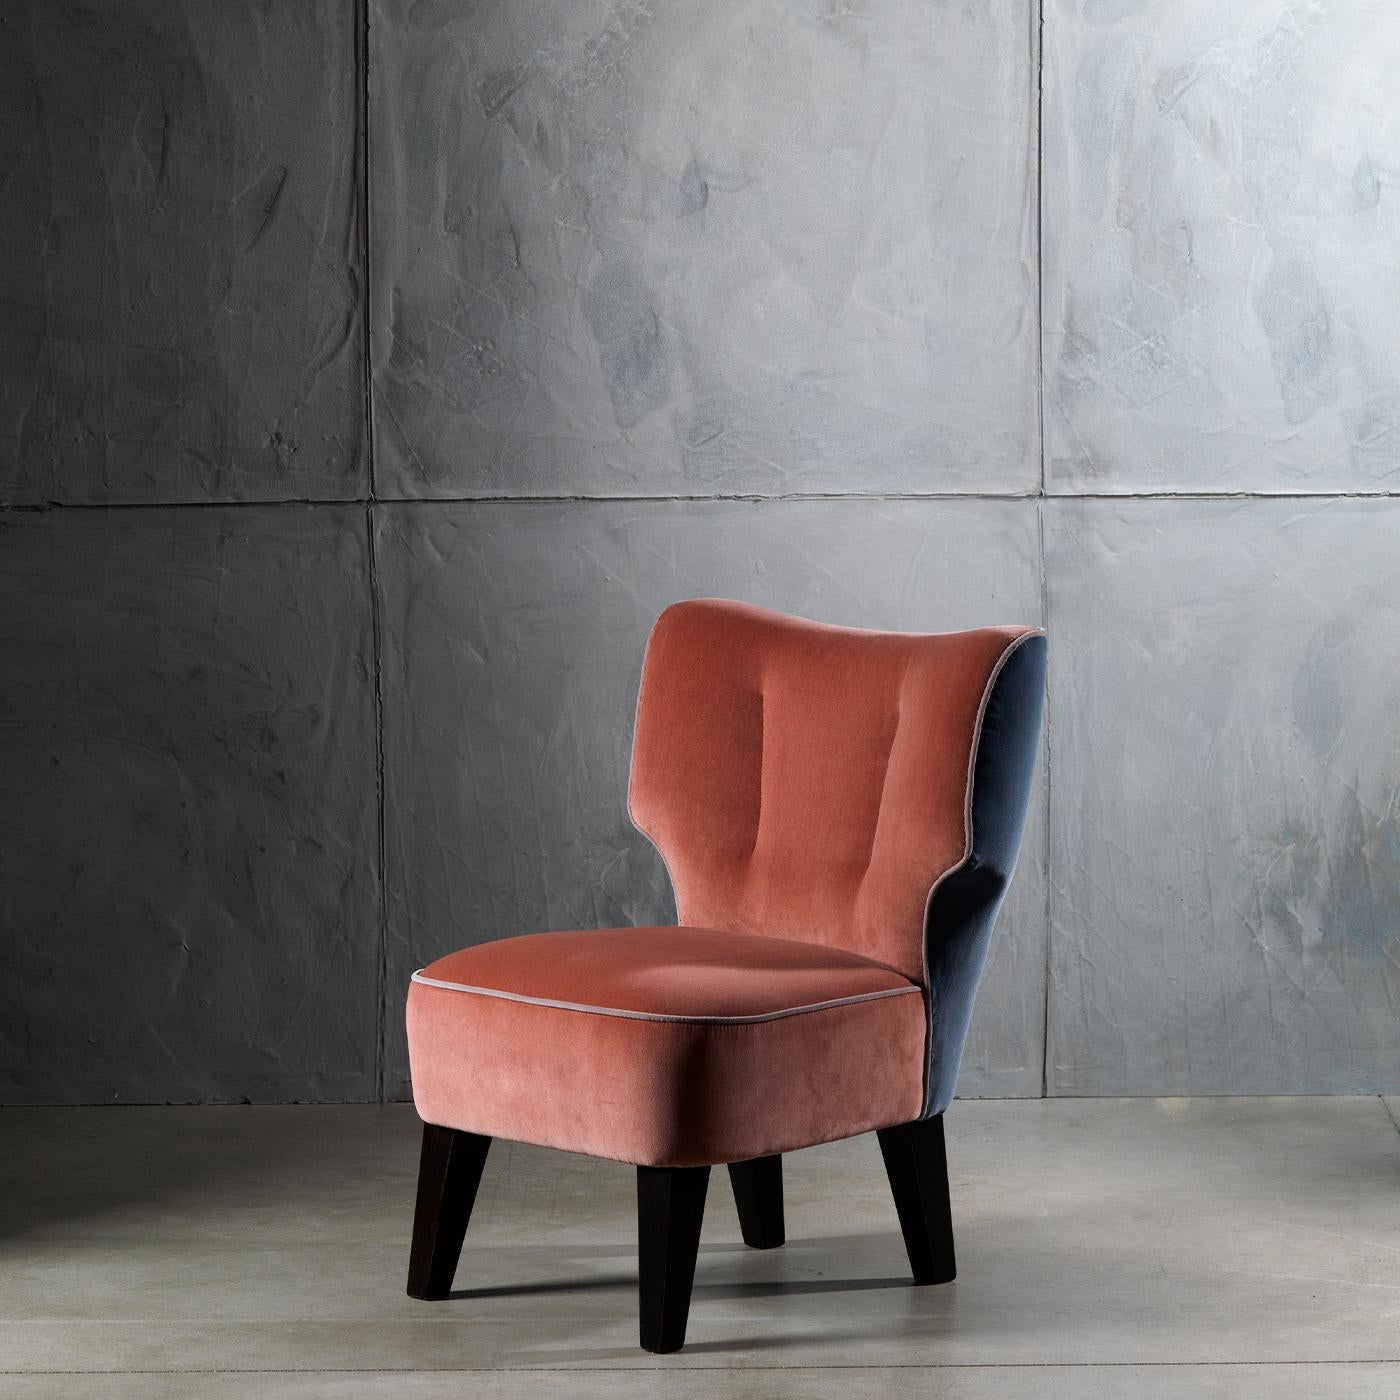 This low-sitting, cozy armchair features a roomy, spacious velvet seat and a back in the soft, comforting colors of powder pink and blue, creating a silhouette defined by surprising, harmonious volumes. It stands upon wooden legs with a dark walnut